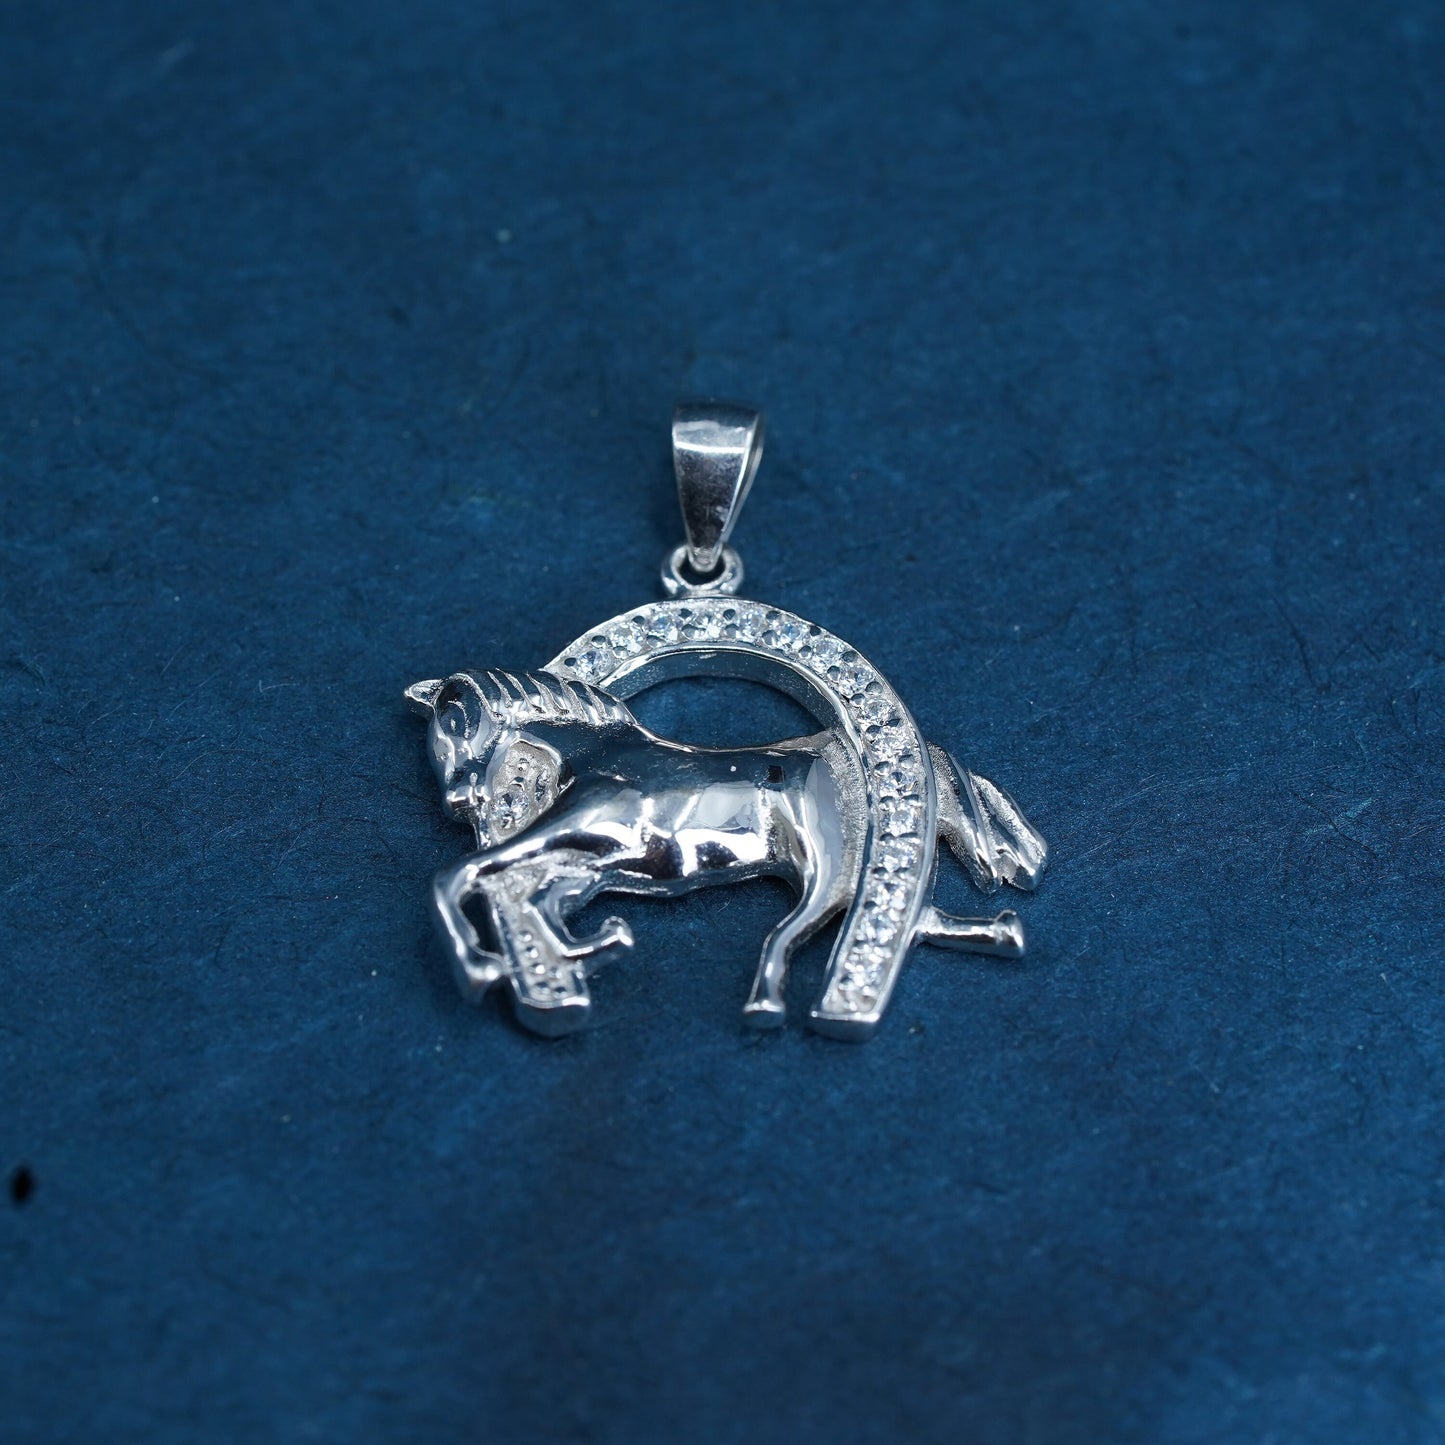 Vintage sterling silver horse pendant, 925 charm with cz horse shoe